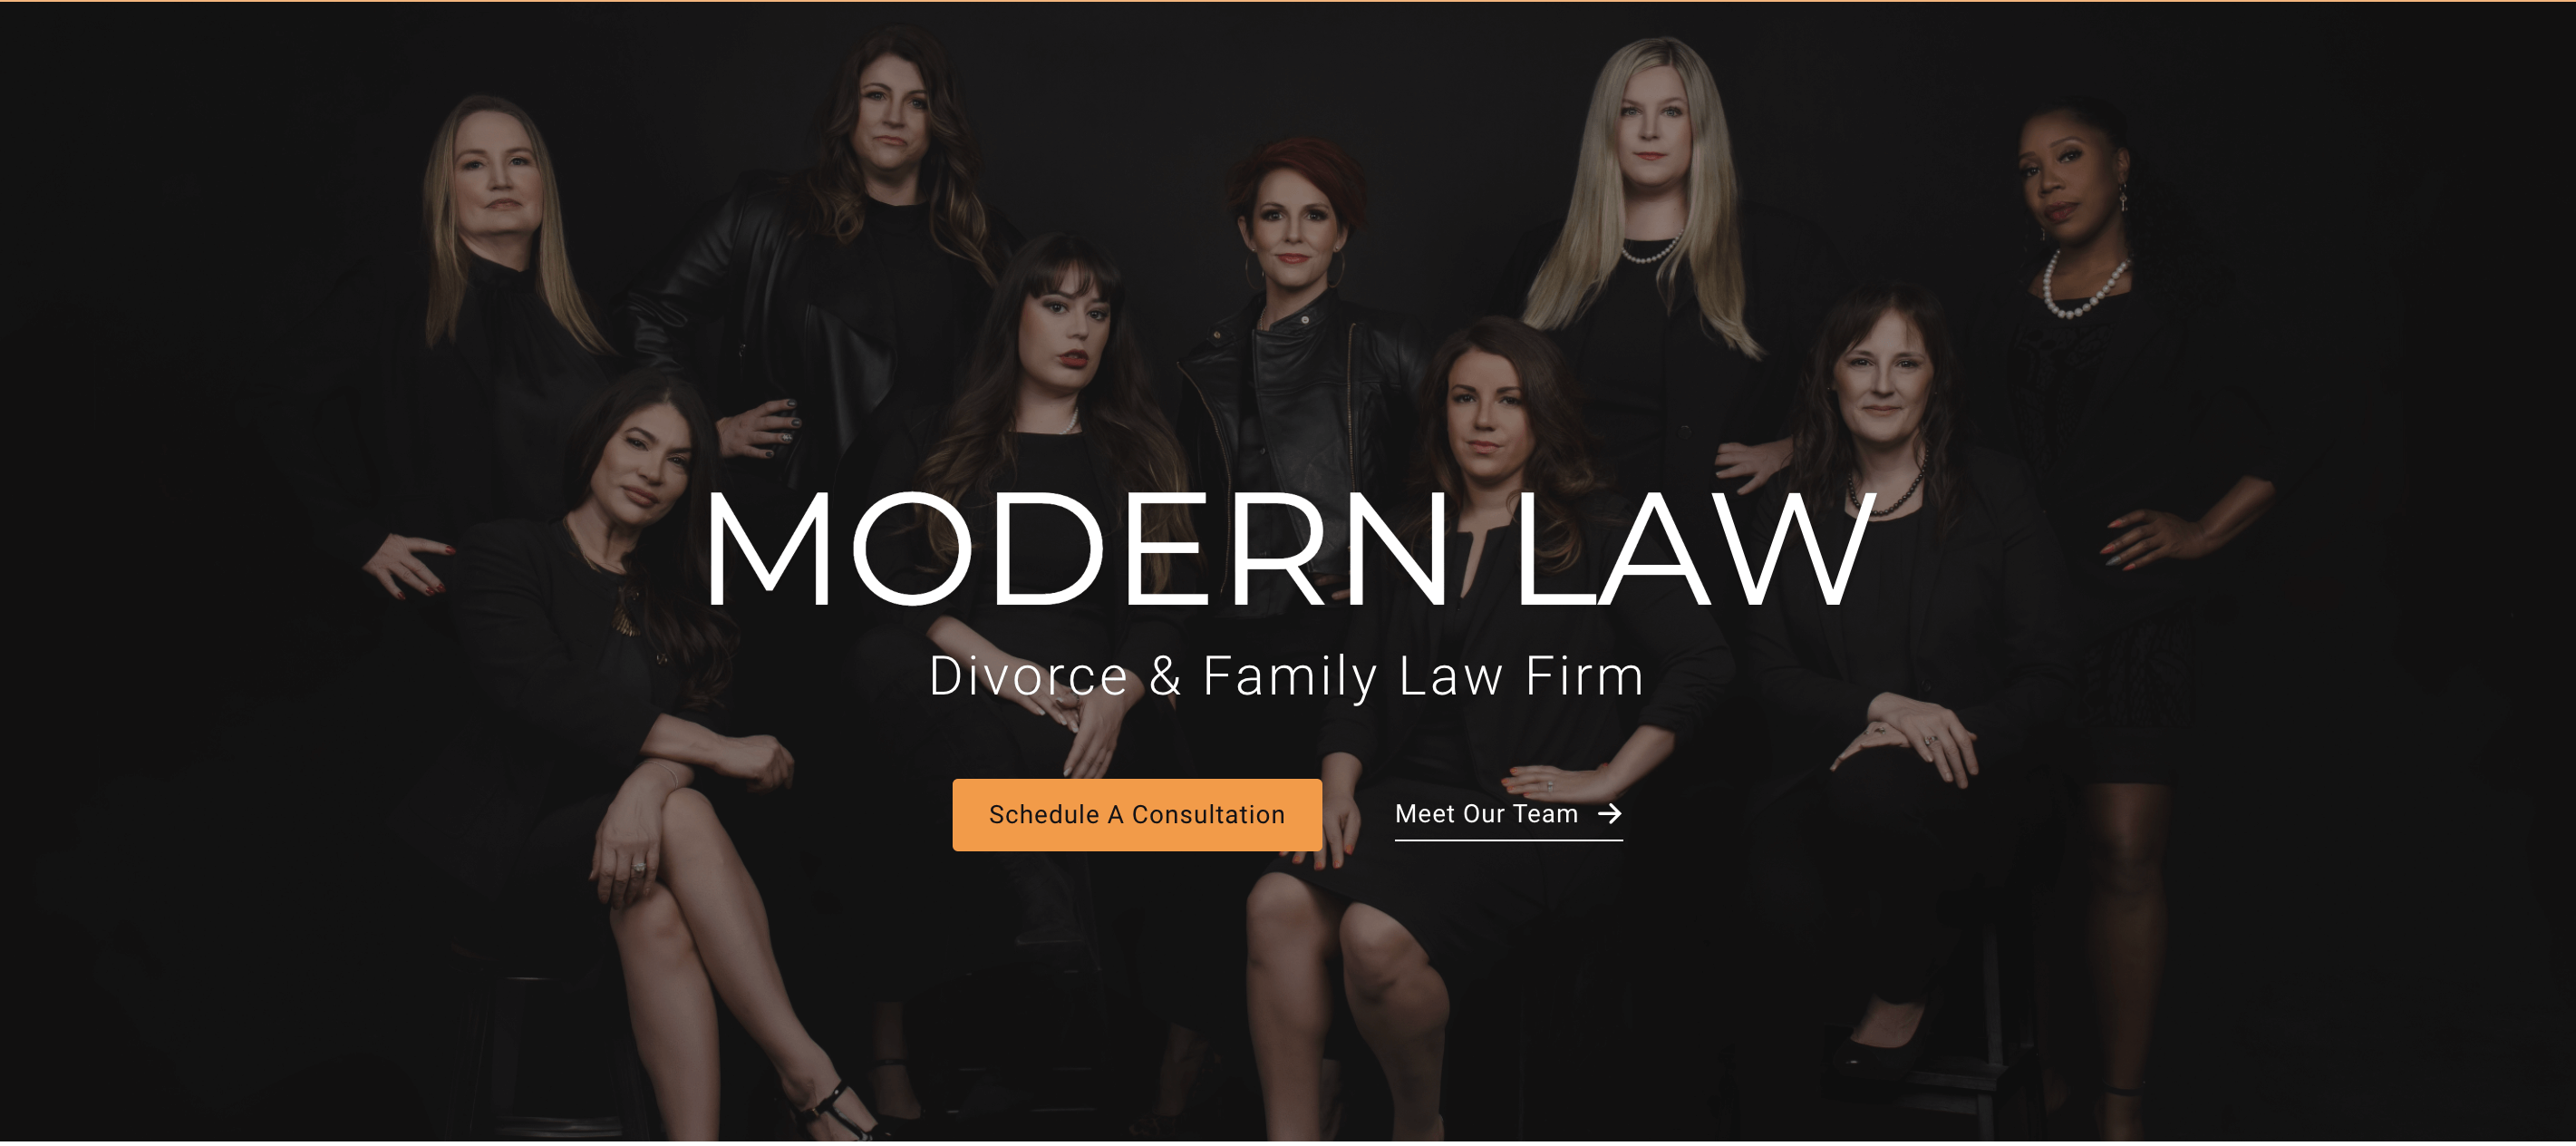 Modern Law Divorce and Family Law Firm's website, featuring a photo of their team.